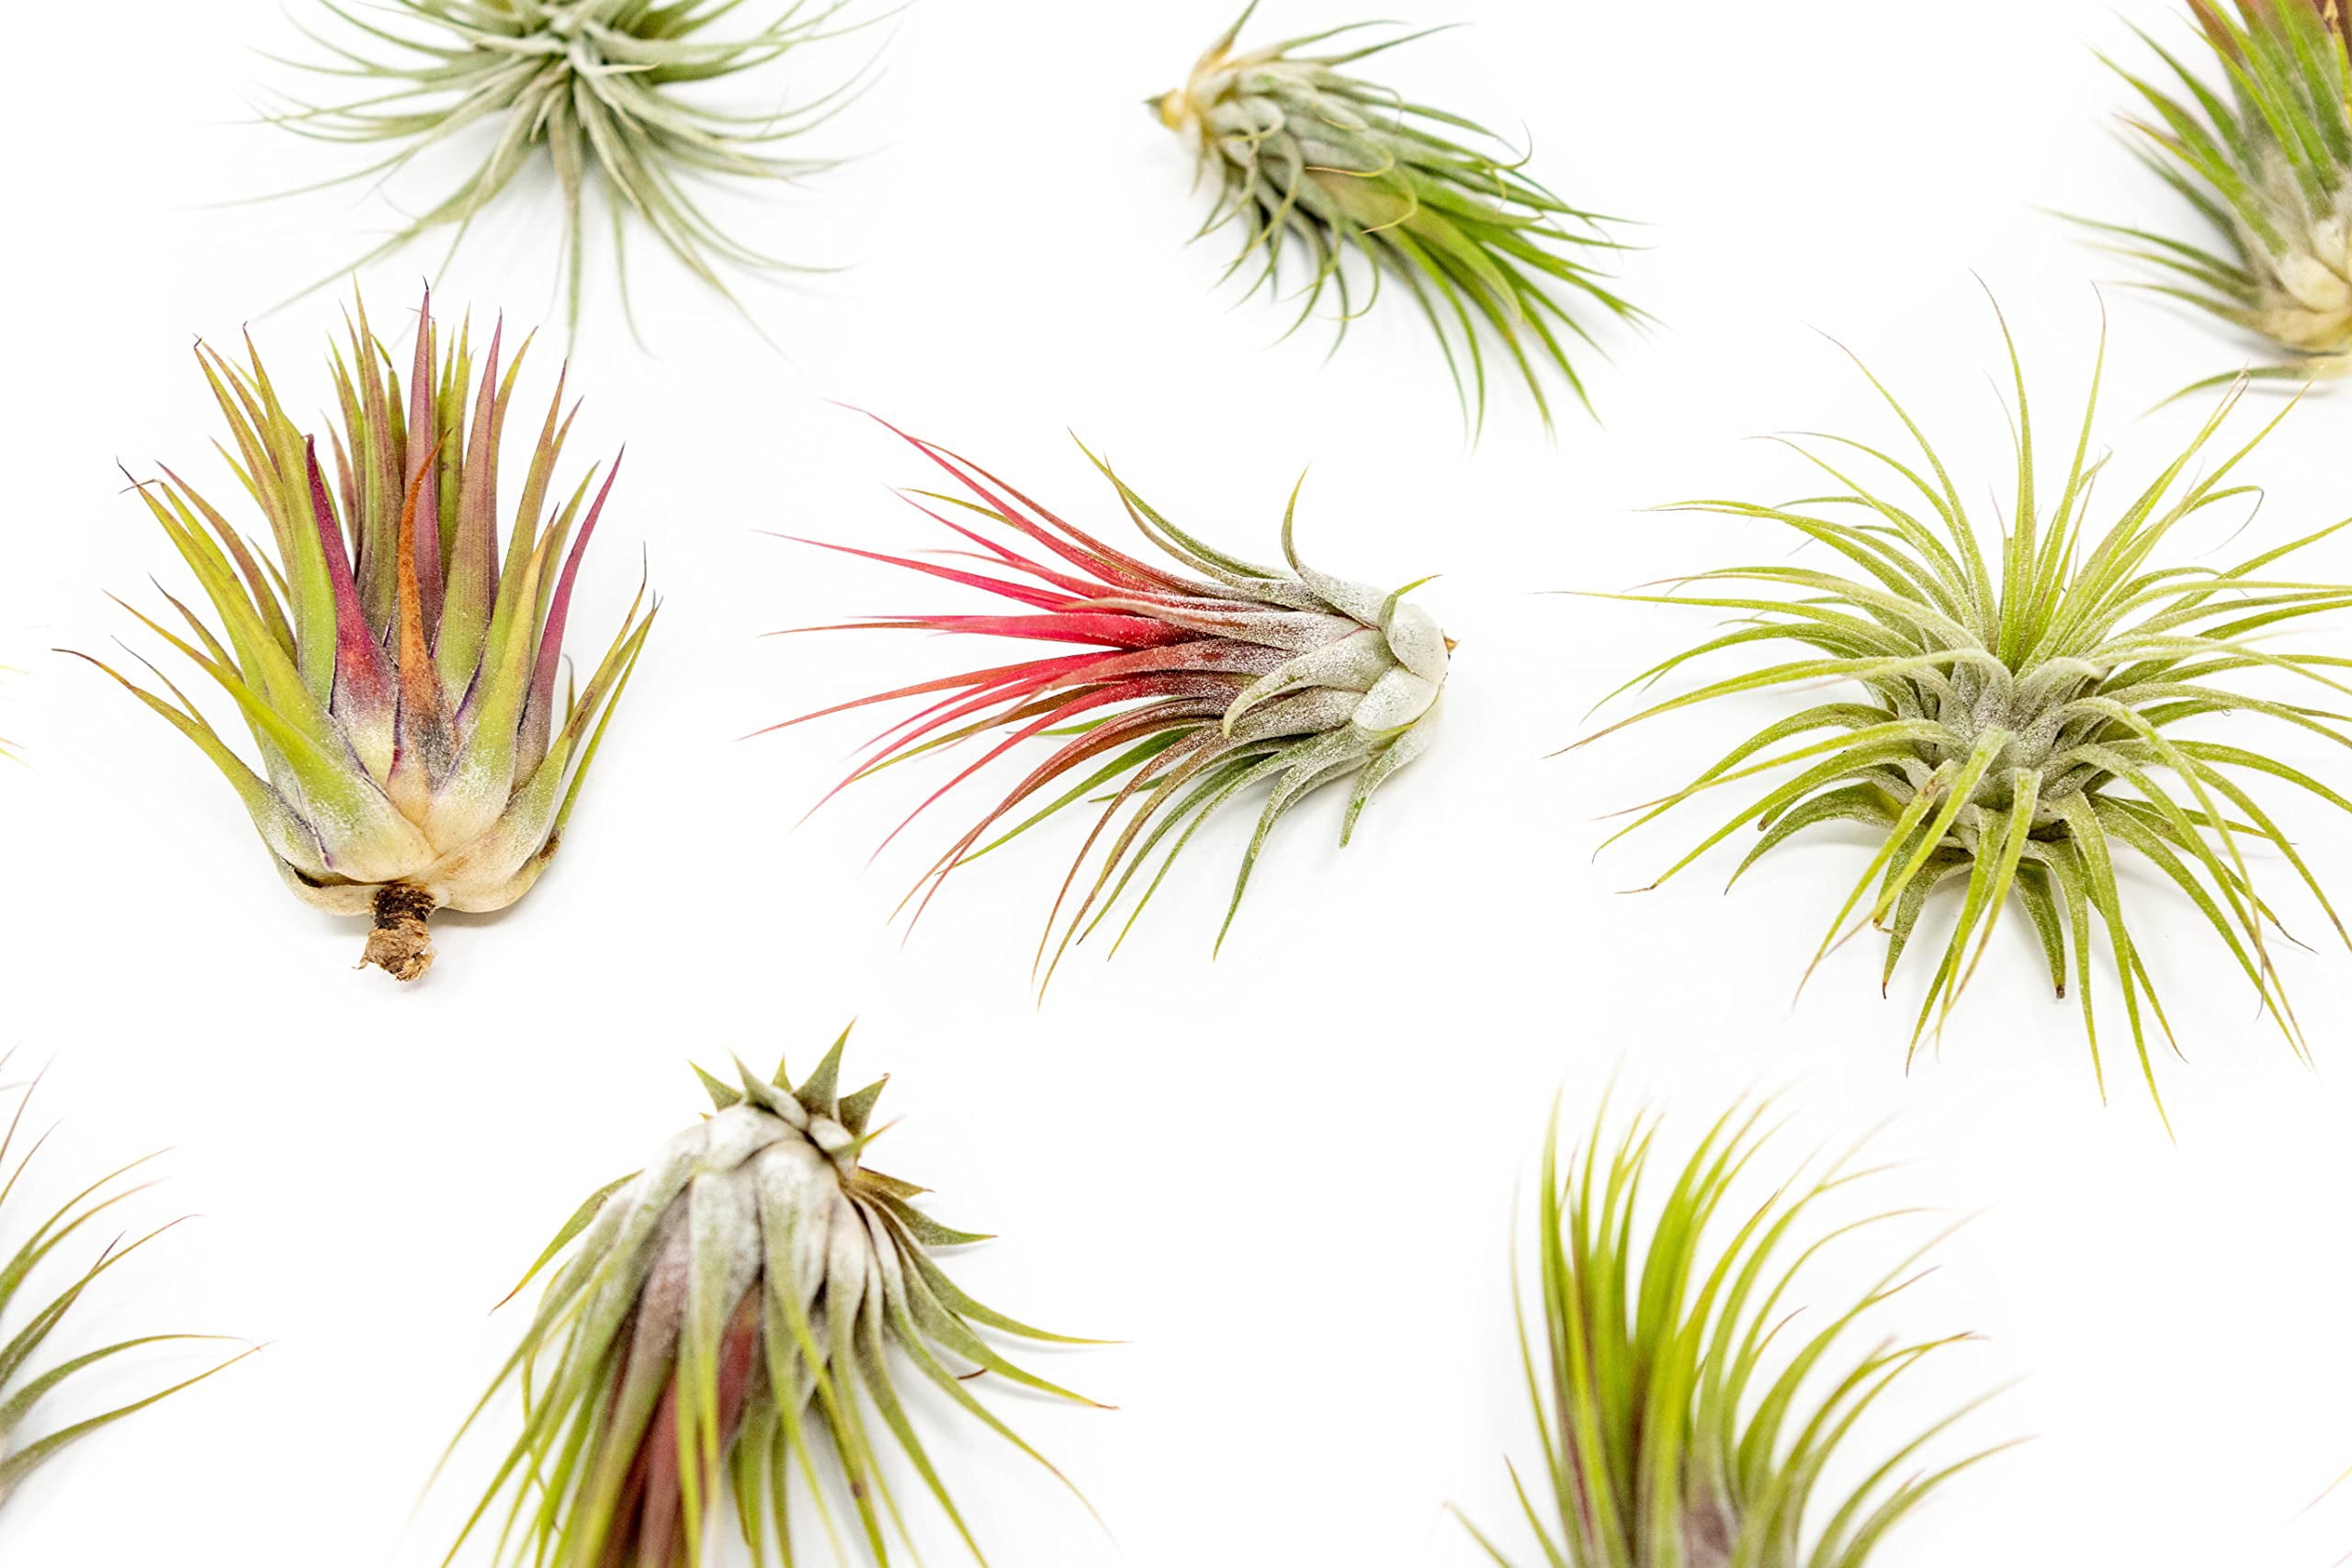 Large Air Plants Tillandsia Ionantha Guatemala - Live Succulent House Plants - Available in Wholesale and Bulk - Home and Garden Decor - Easy Care Indoor and Outdoor Plants (Pack of 12)